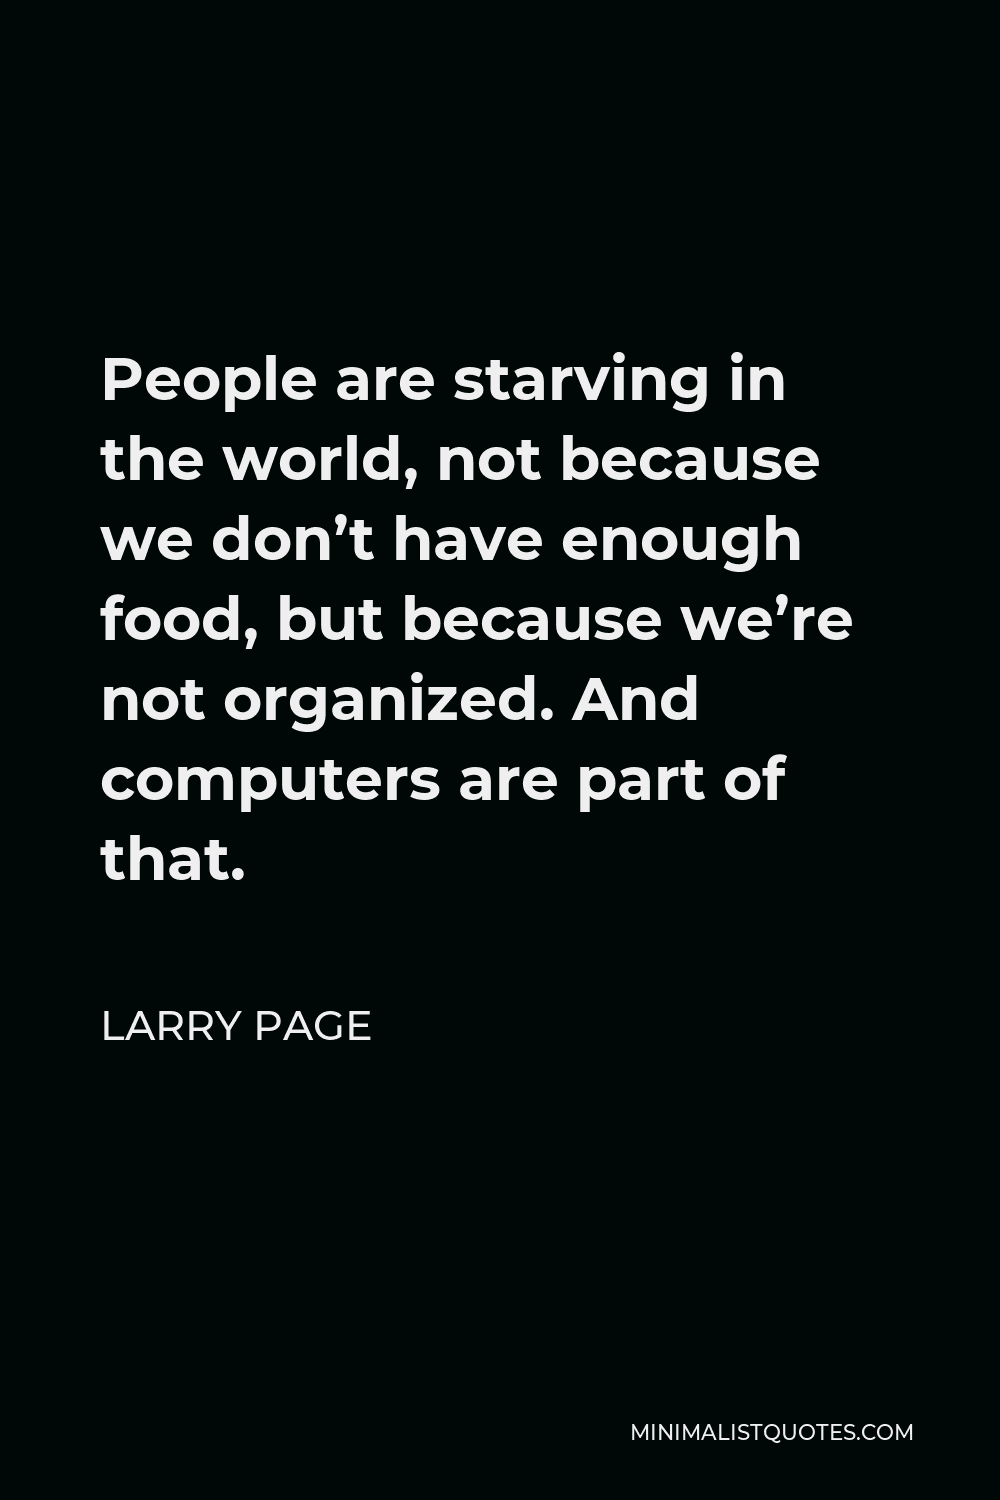 Larry Page Quote - People are starving in the world, not because we don’t have enough food, but because we’re not organized. And computers are part of that.